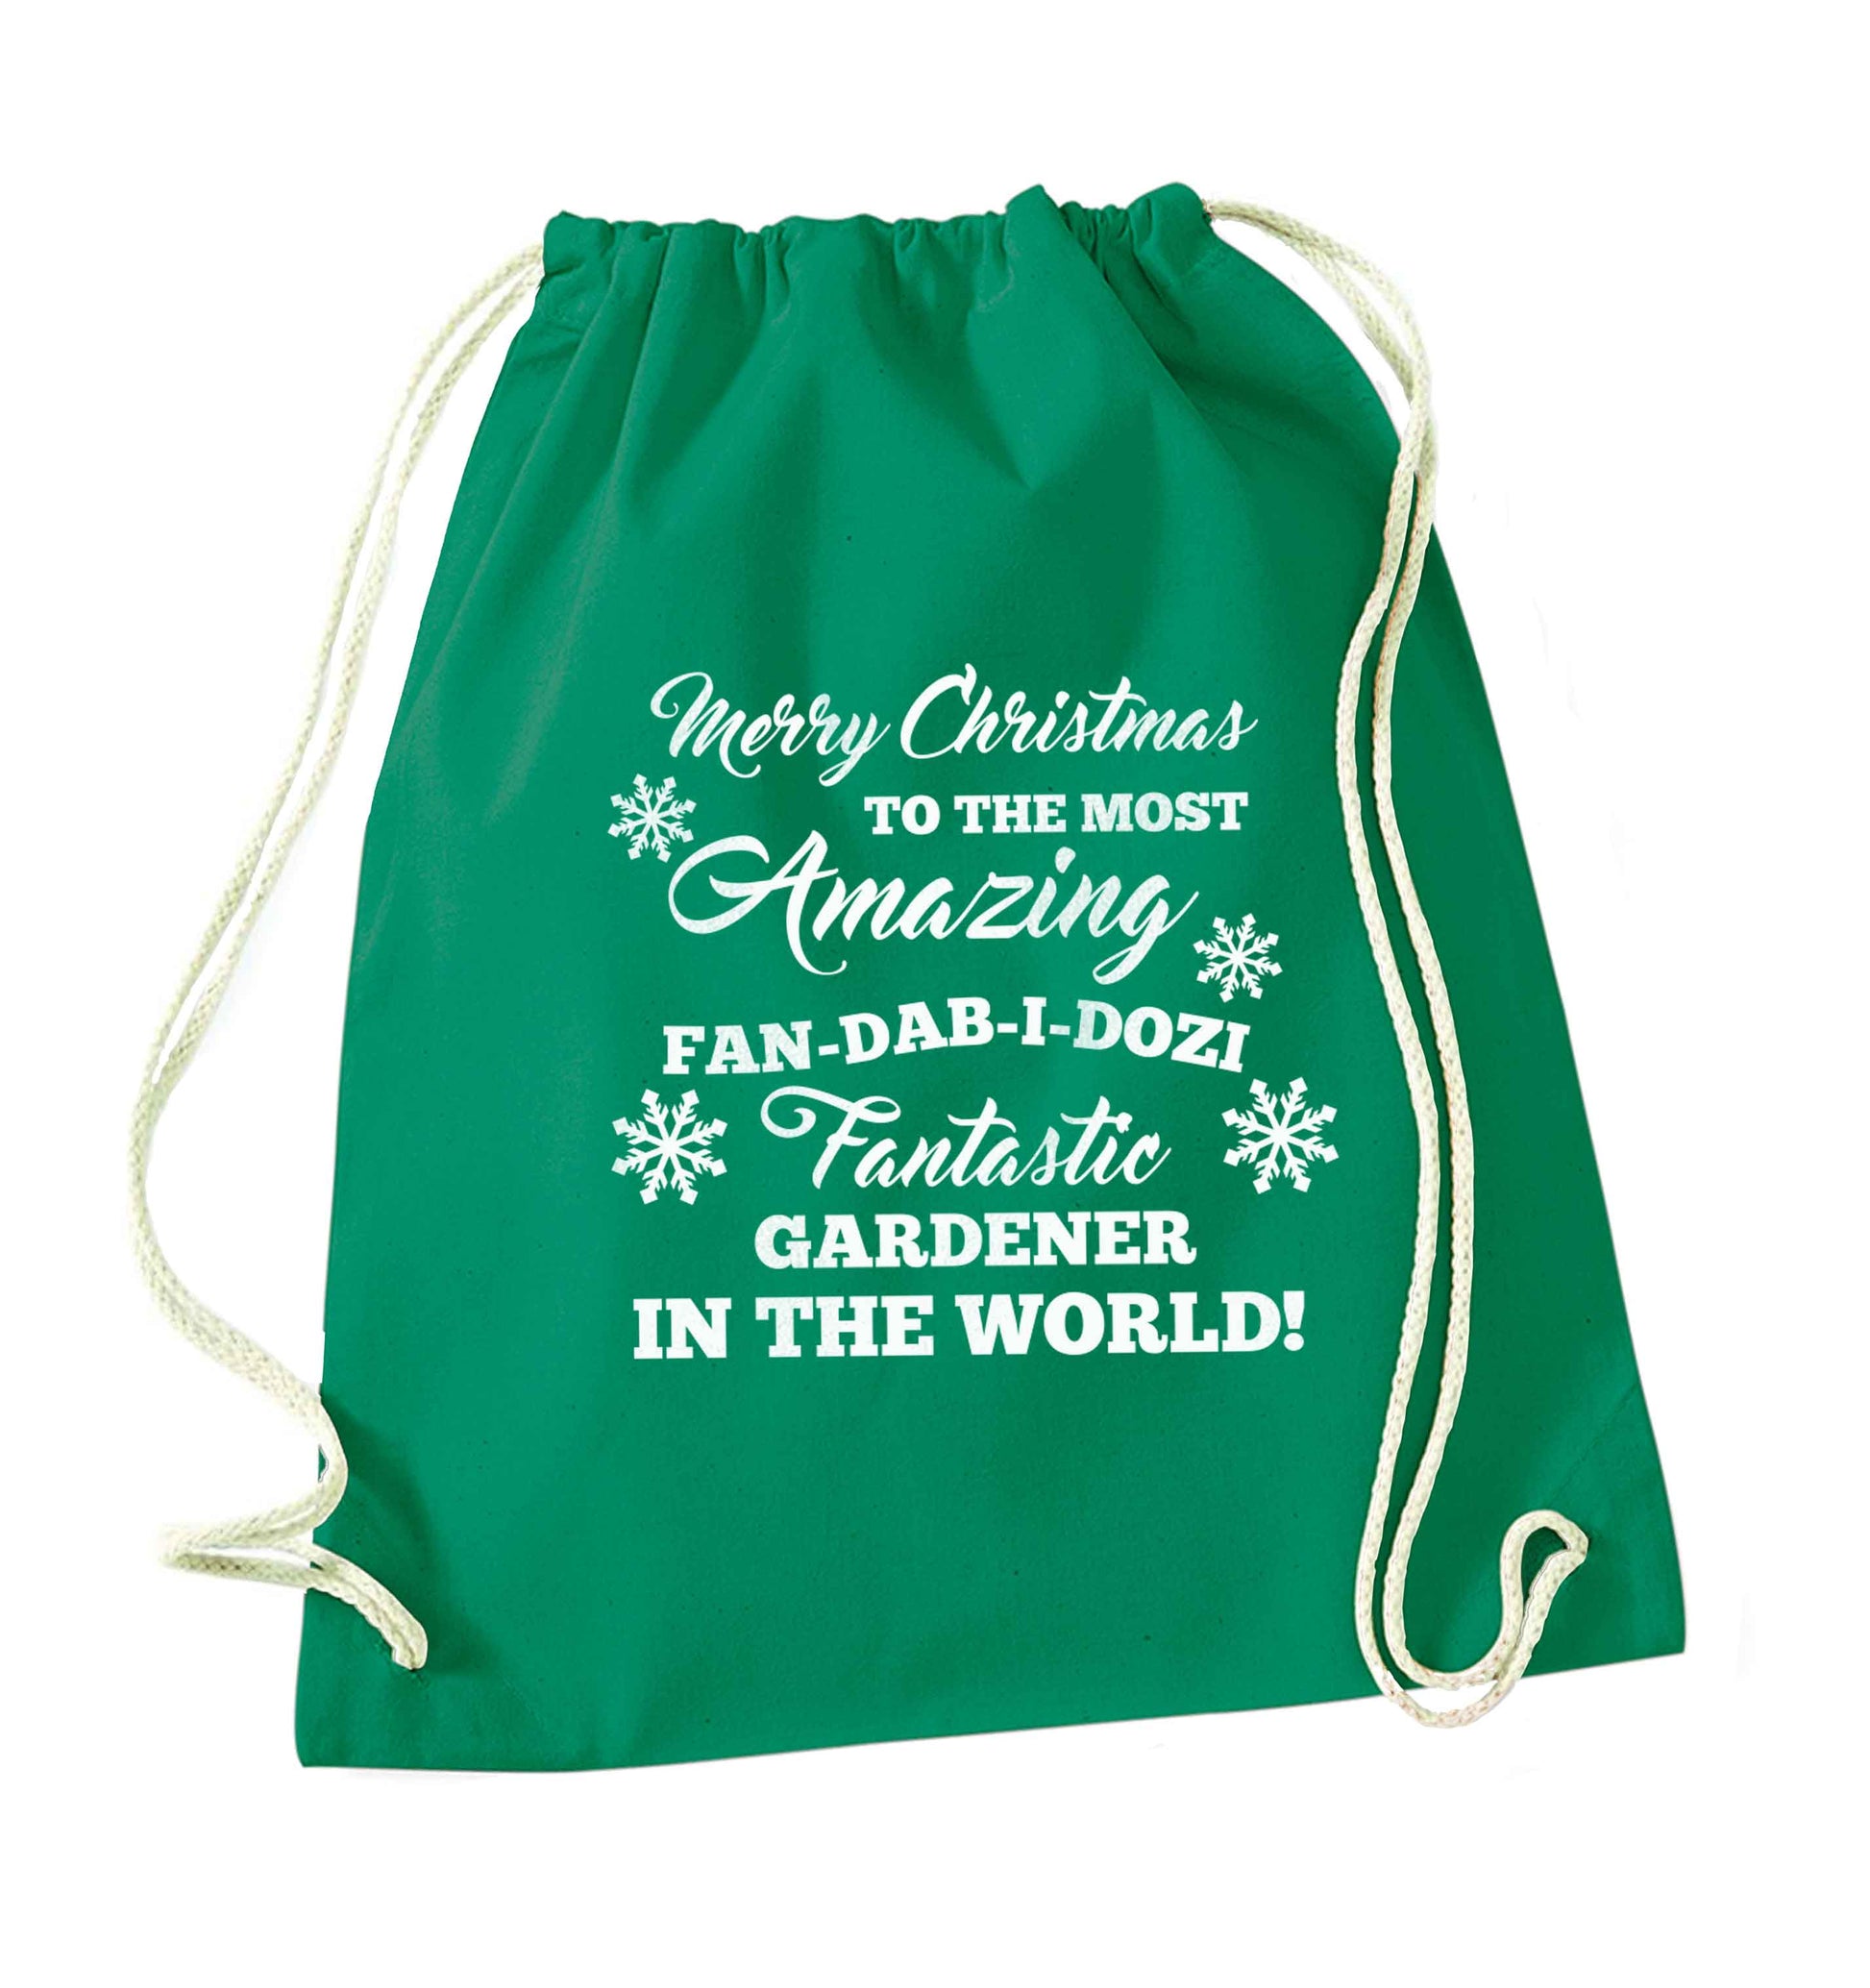 Merry Christmas to the most amazing gardener in the world! green drawstring bag